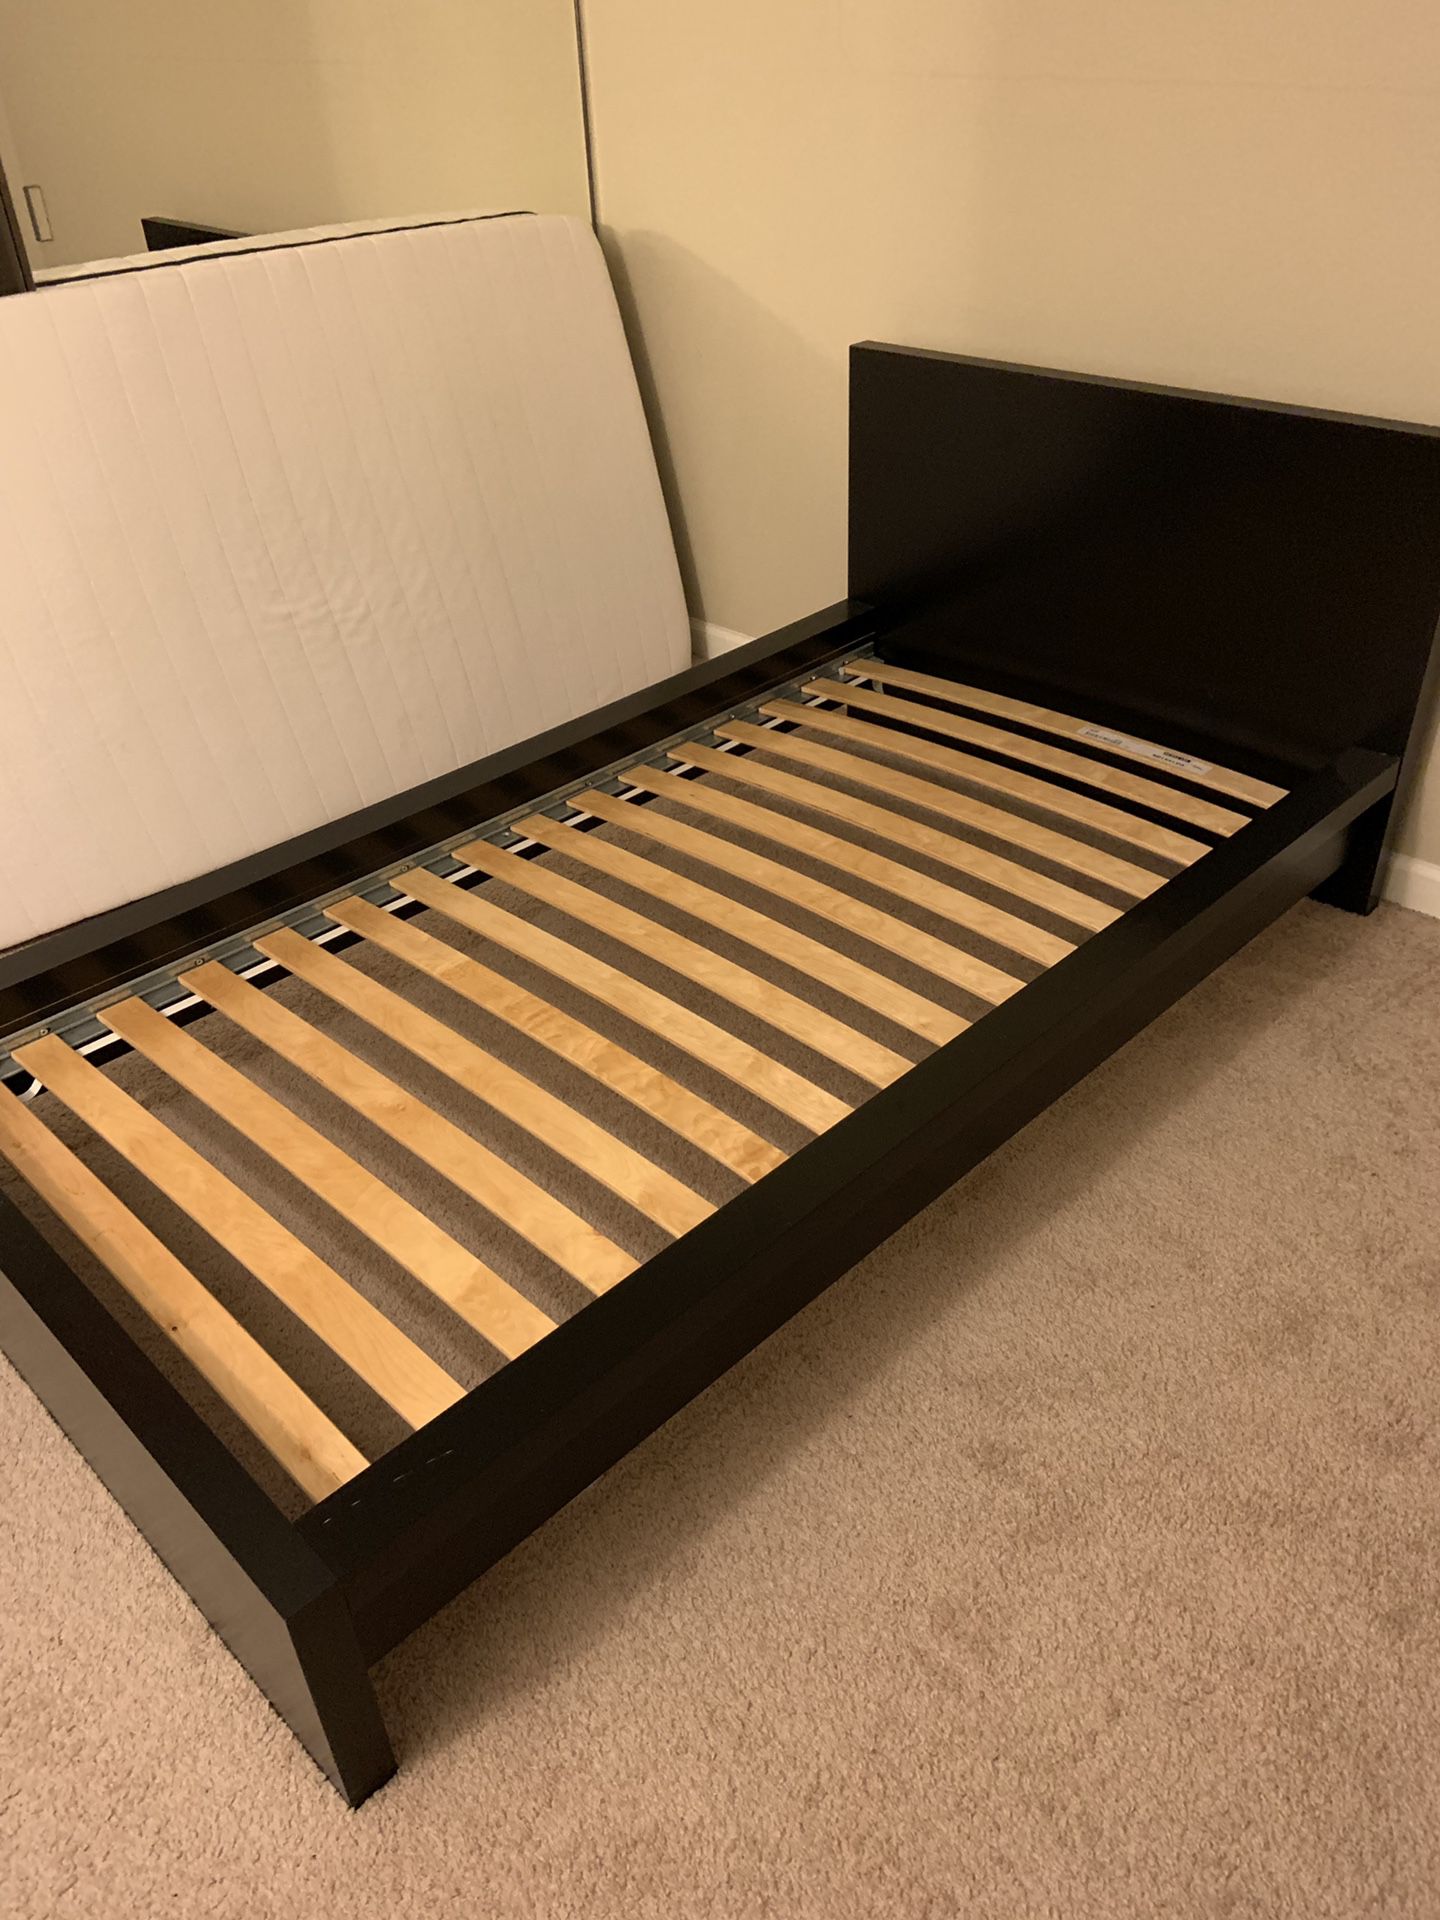 IKEA Twin bed Frame with wooden slats